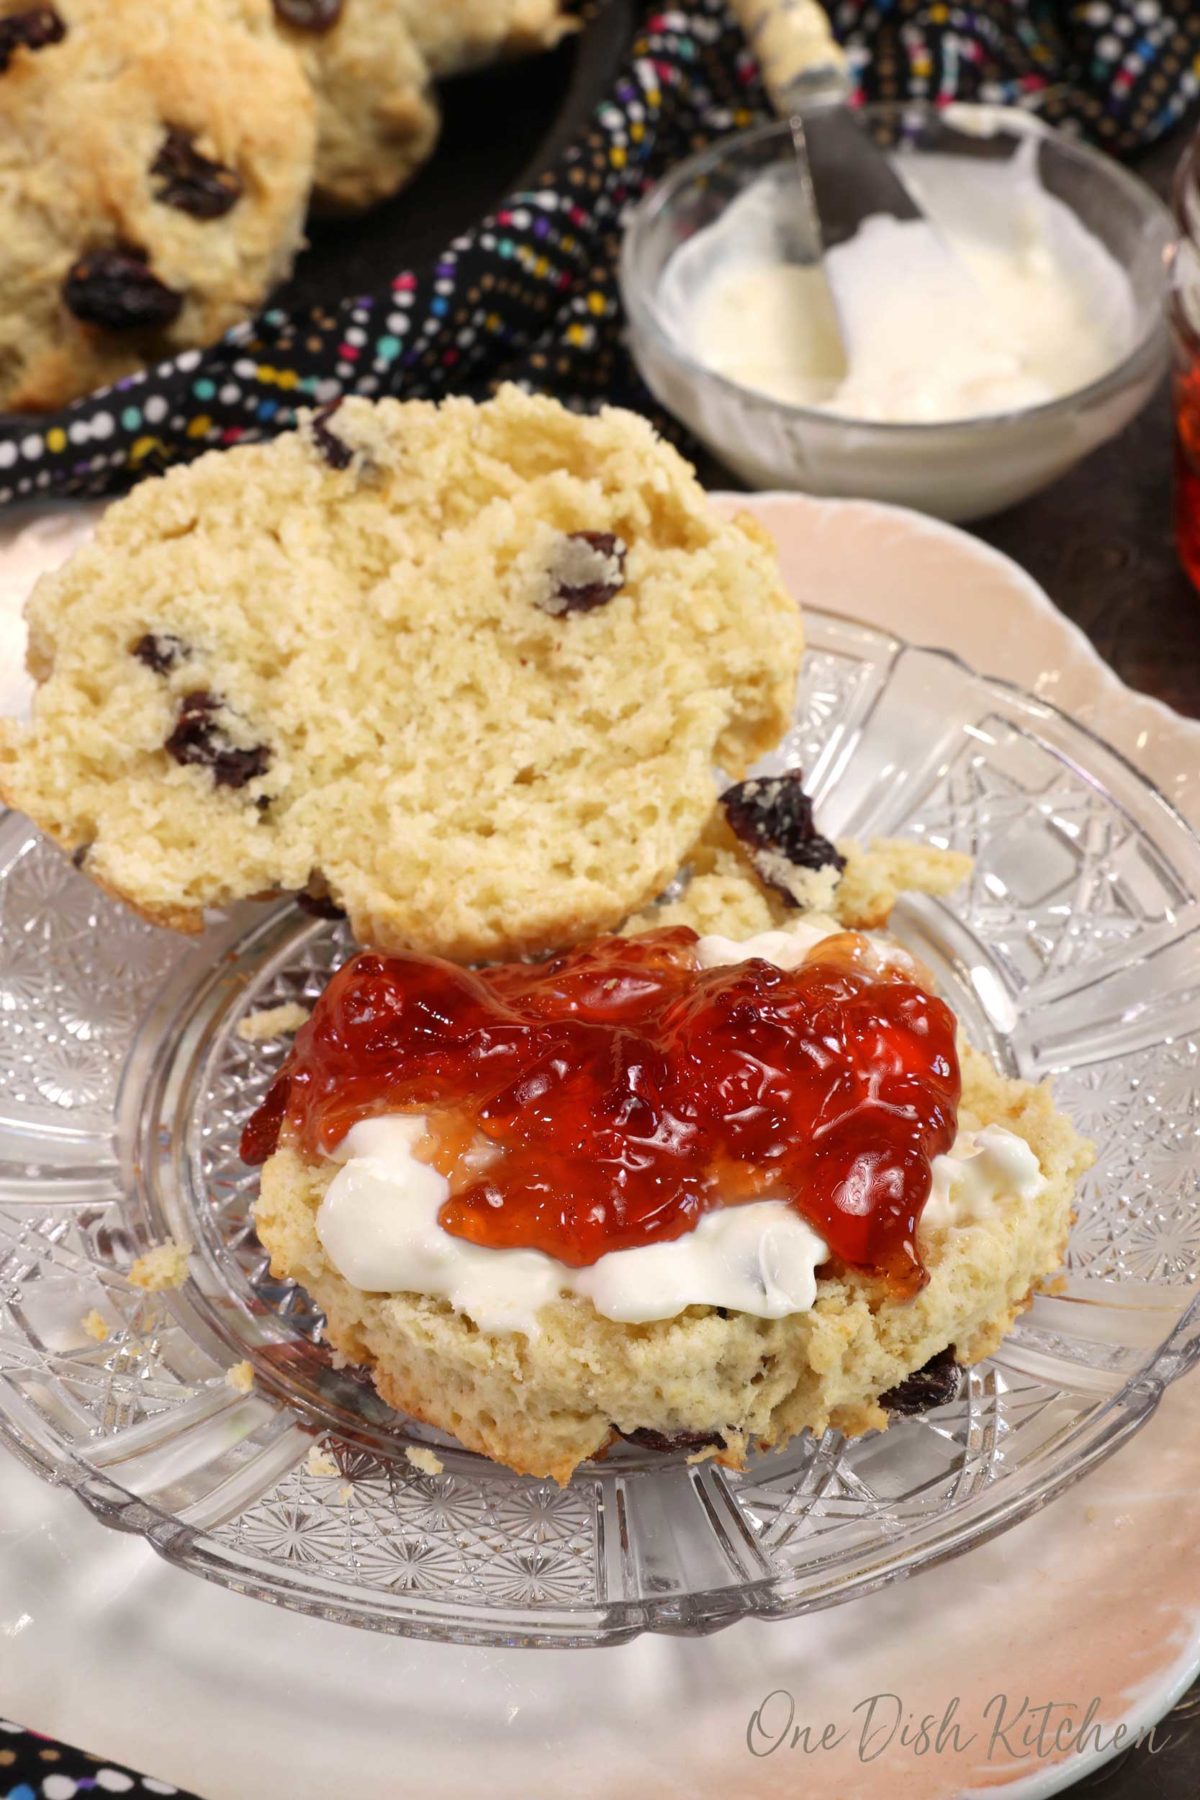 a scone sliced in half with one side topped with clotted cream and jam